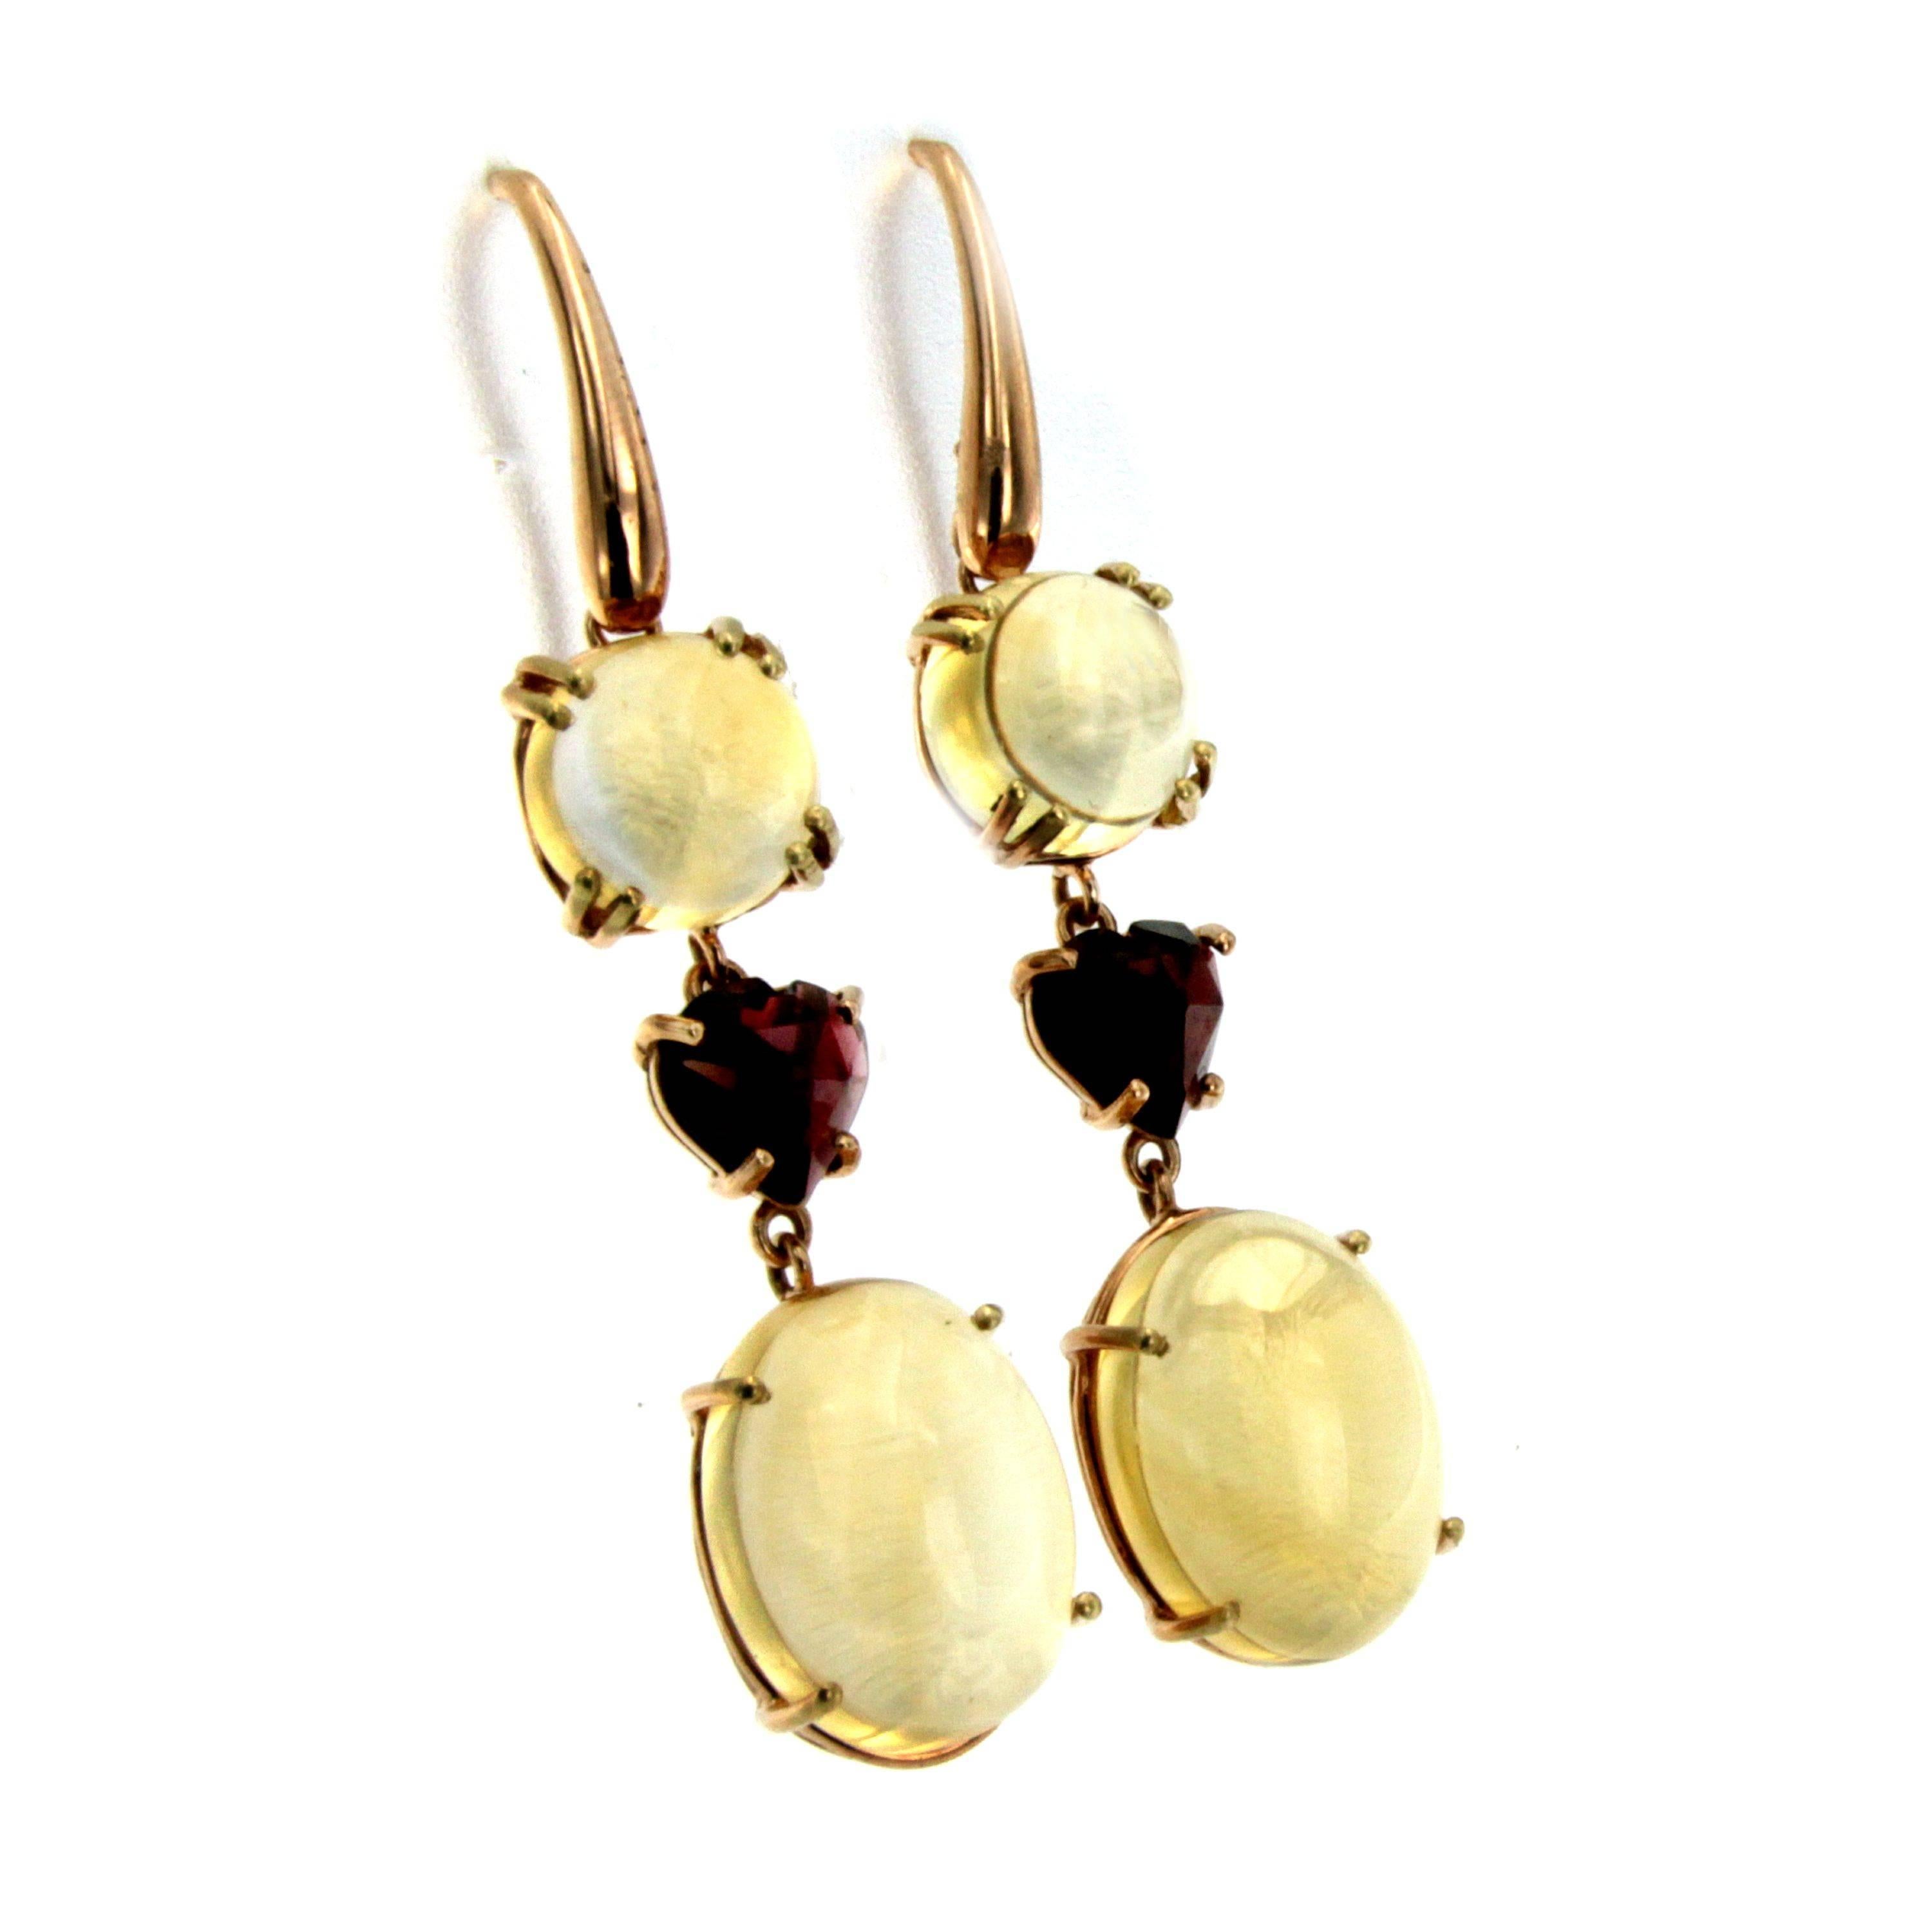 These Beautiful and unusual 18k white rose gold earrings feature at the bottom 2 large teardrop oval natural Citrine Quartz, connected by open links set with 2 Heart cut Garnet and up two cabochon of Citrine Quartz.

CONDITION: Brand new
METAL: 18k